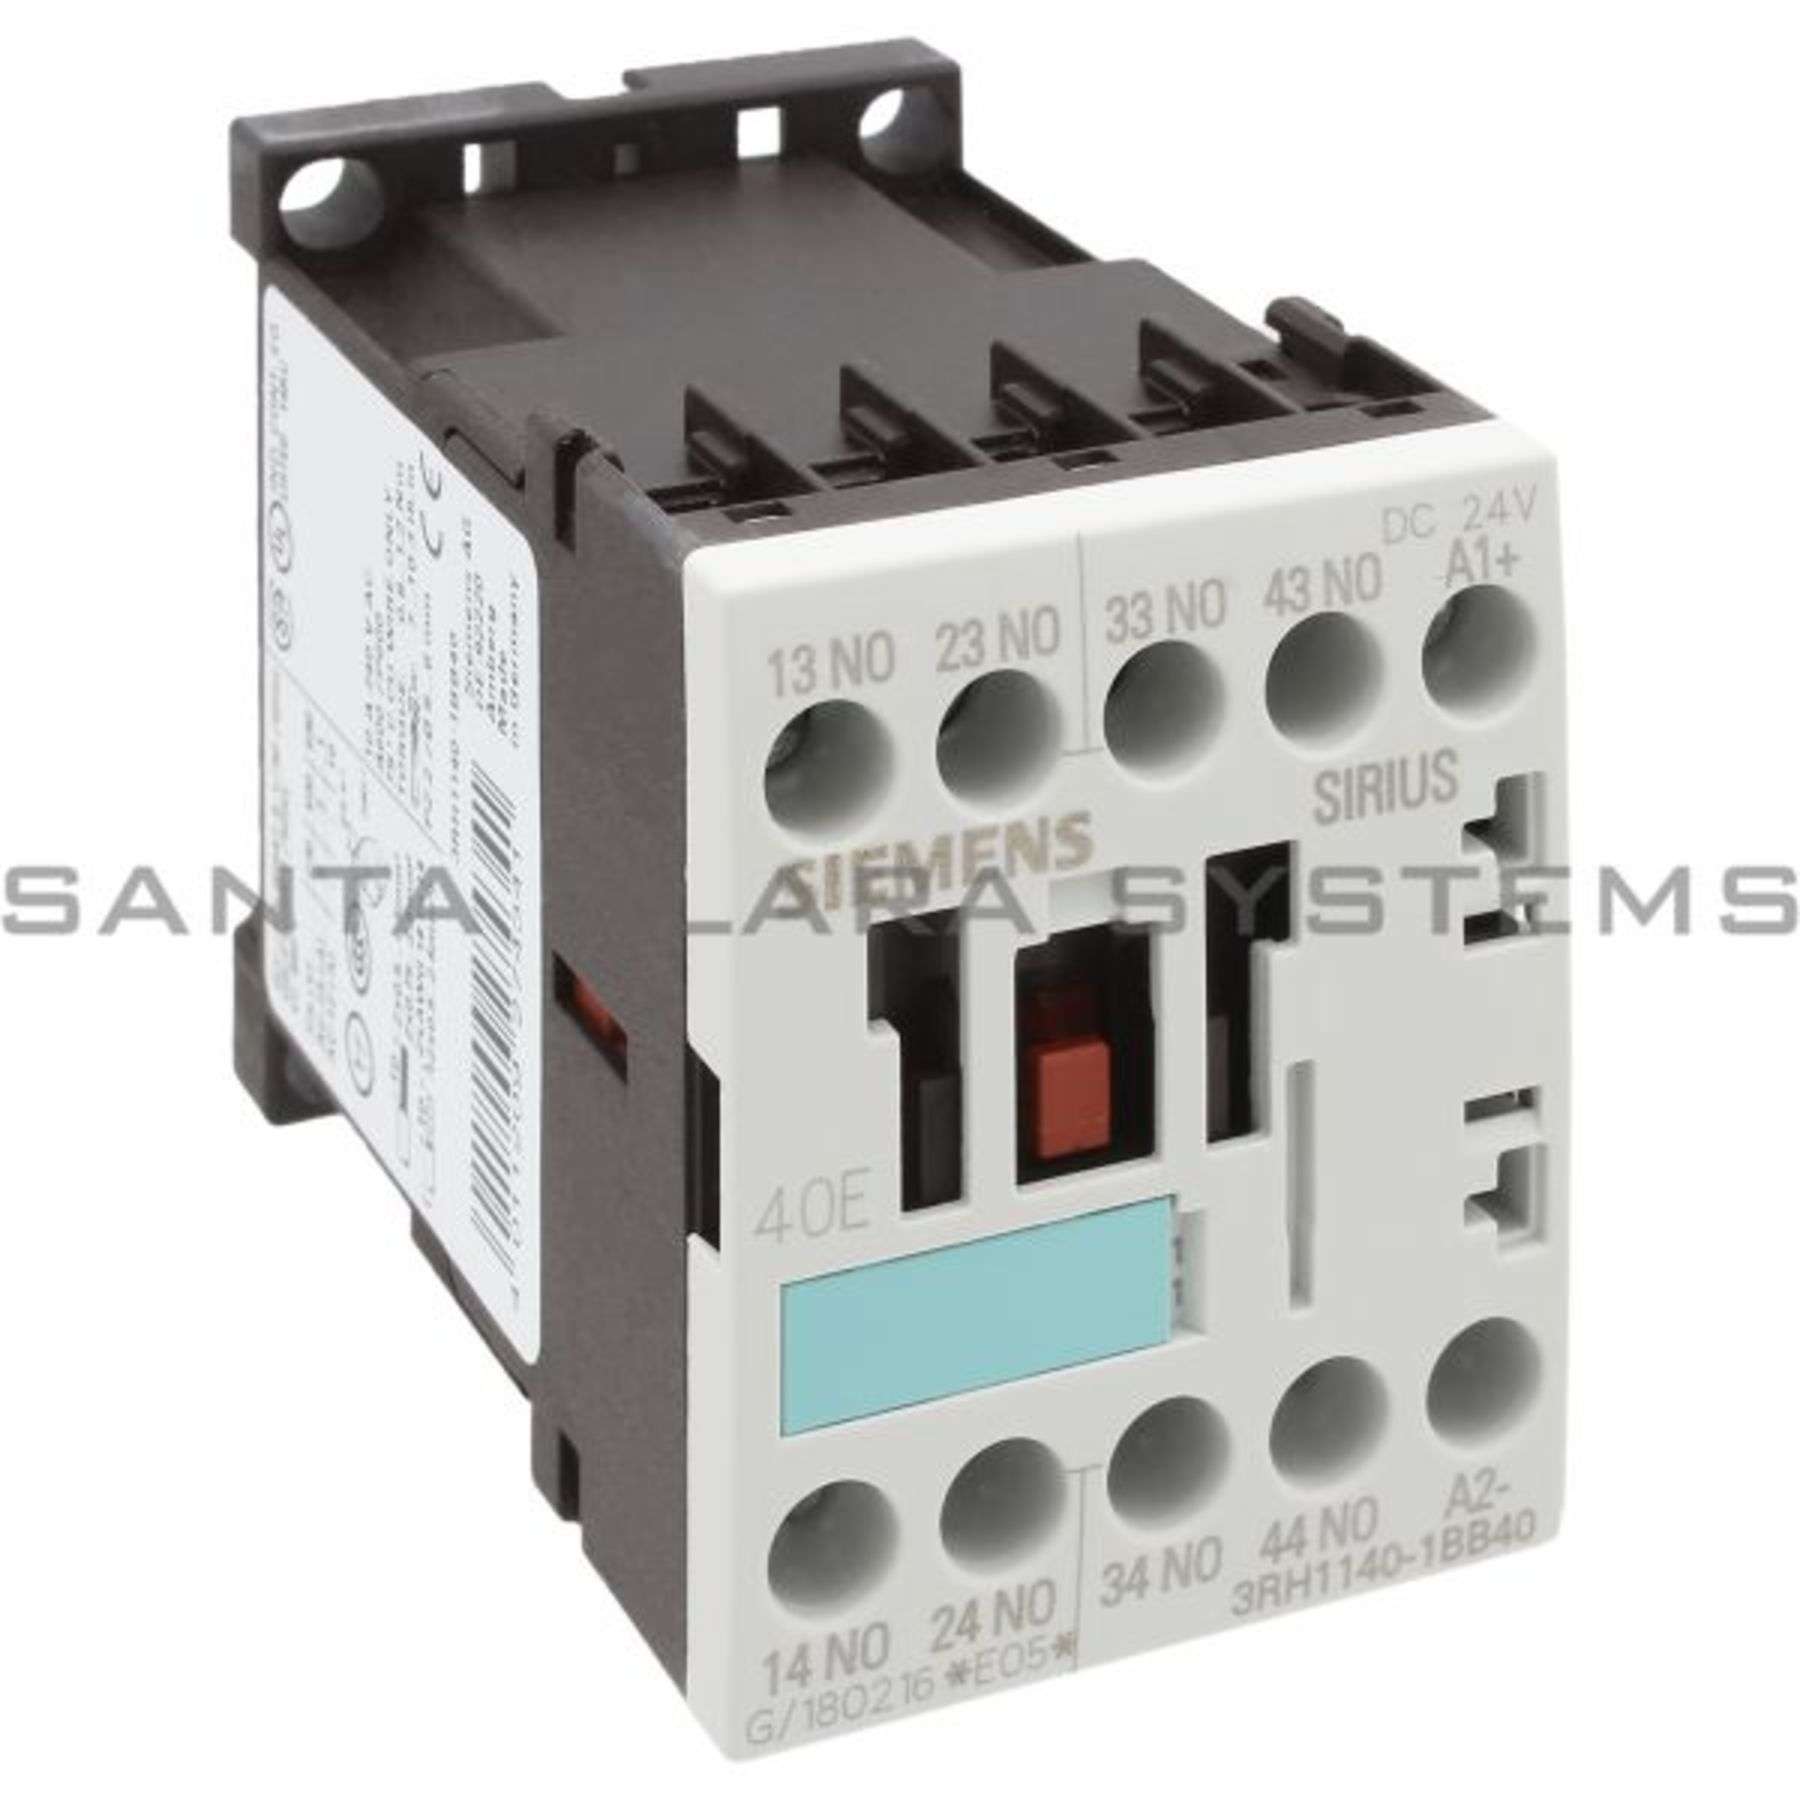 SIRUS AUXILIARY CONTACTOR RELAY NEW #243937 SIEMENS 3RH1140-1BB40